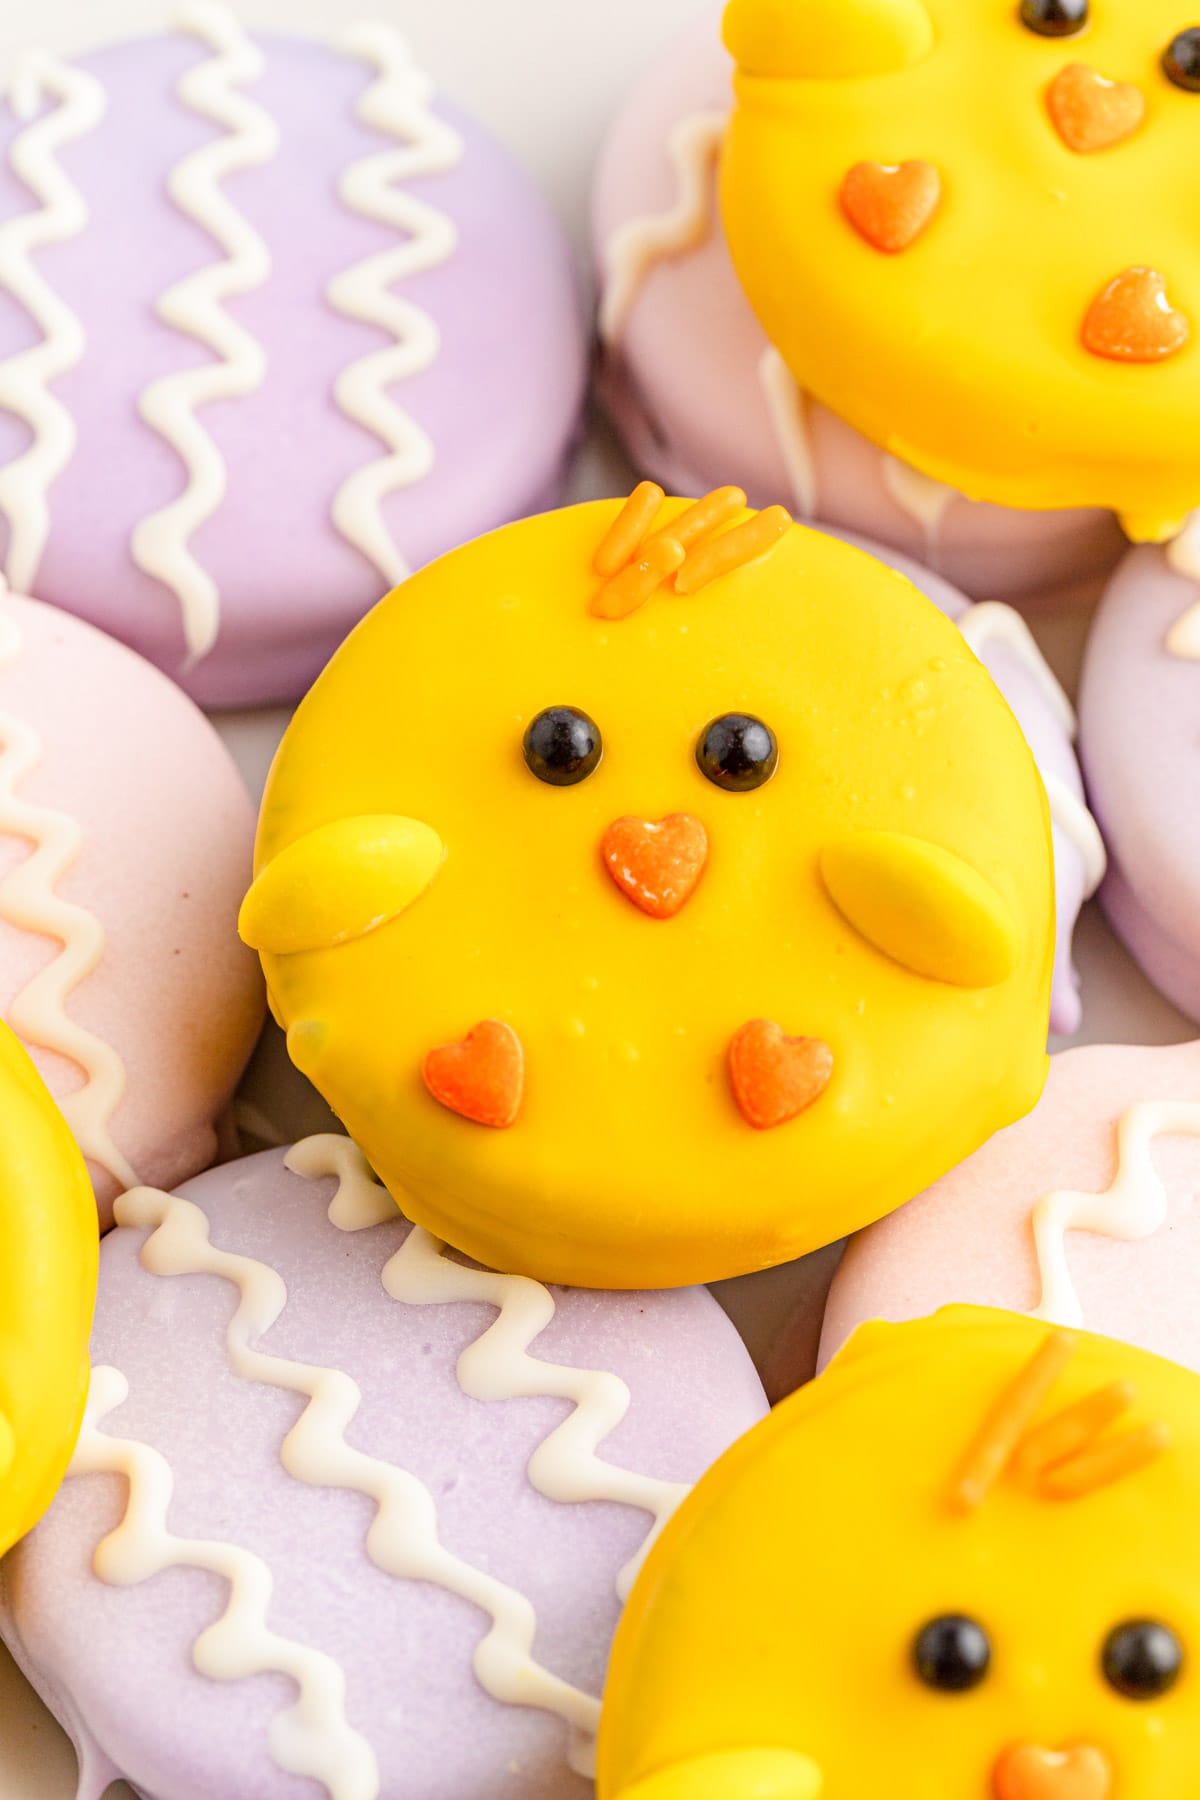 Oreos dipped colorful chocolate to make chicks and Easter eggs